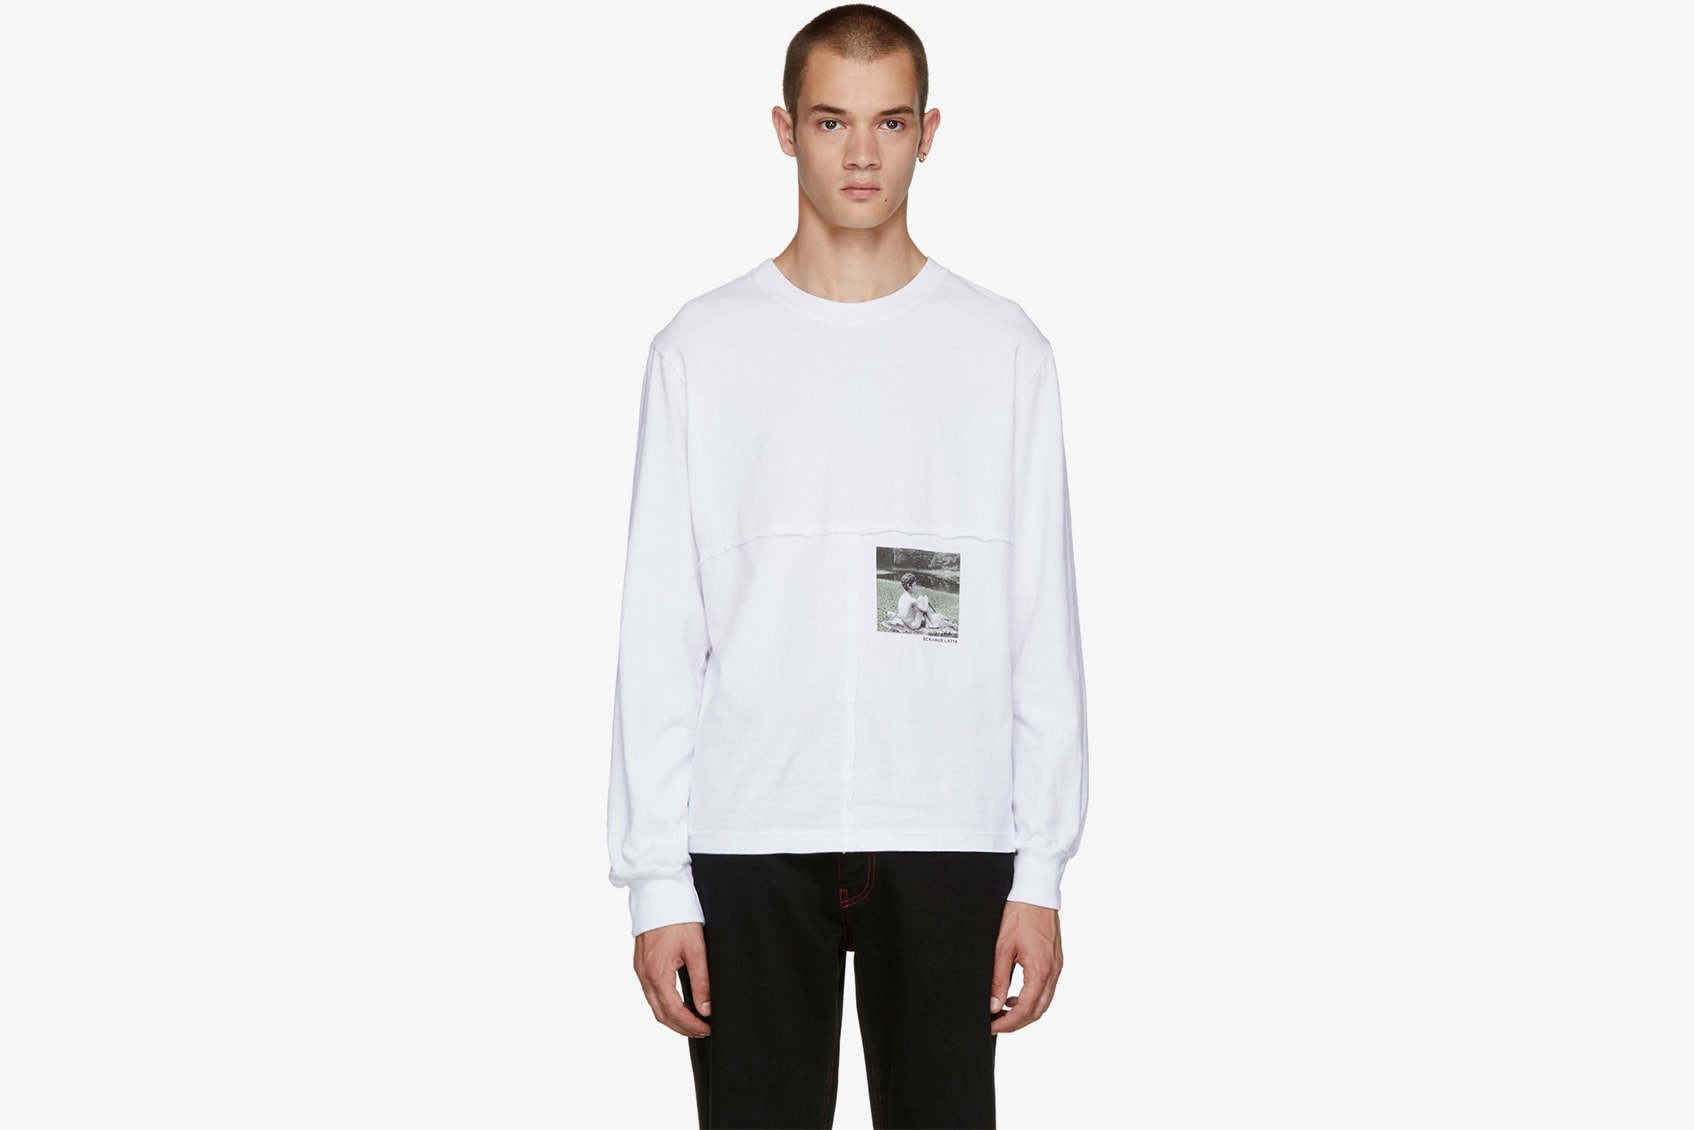 Eckhaus Latta Exclusive SSENSE Clothing Jackets Long Sleeve Short Sleeve T-Shirts Available Purchase Buy Cop Now